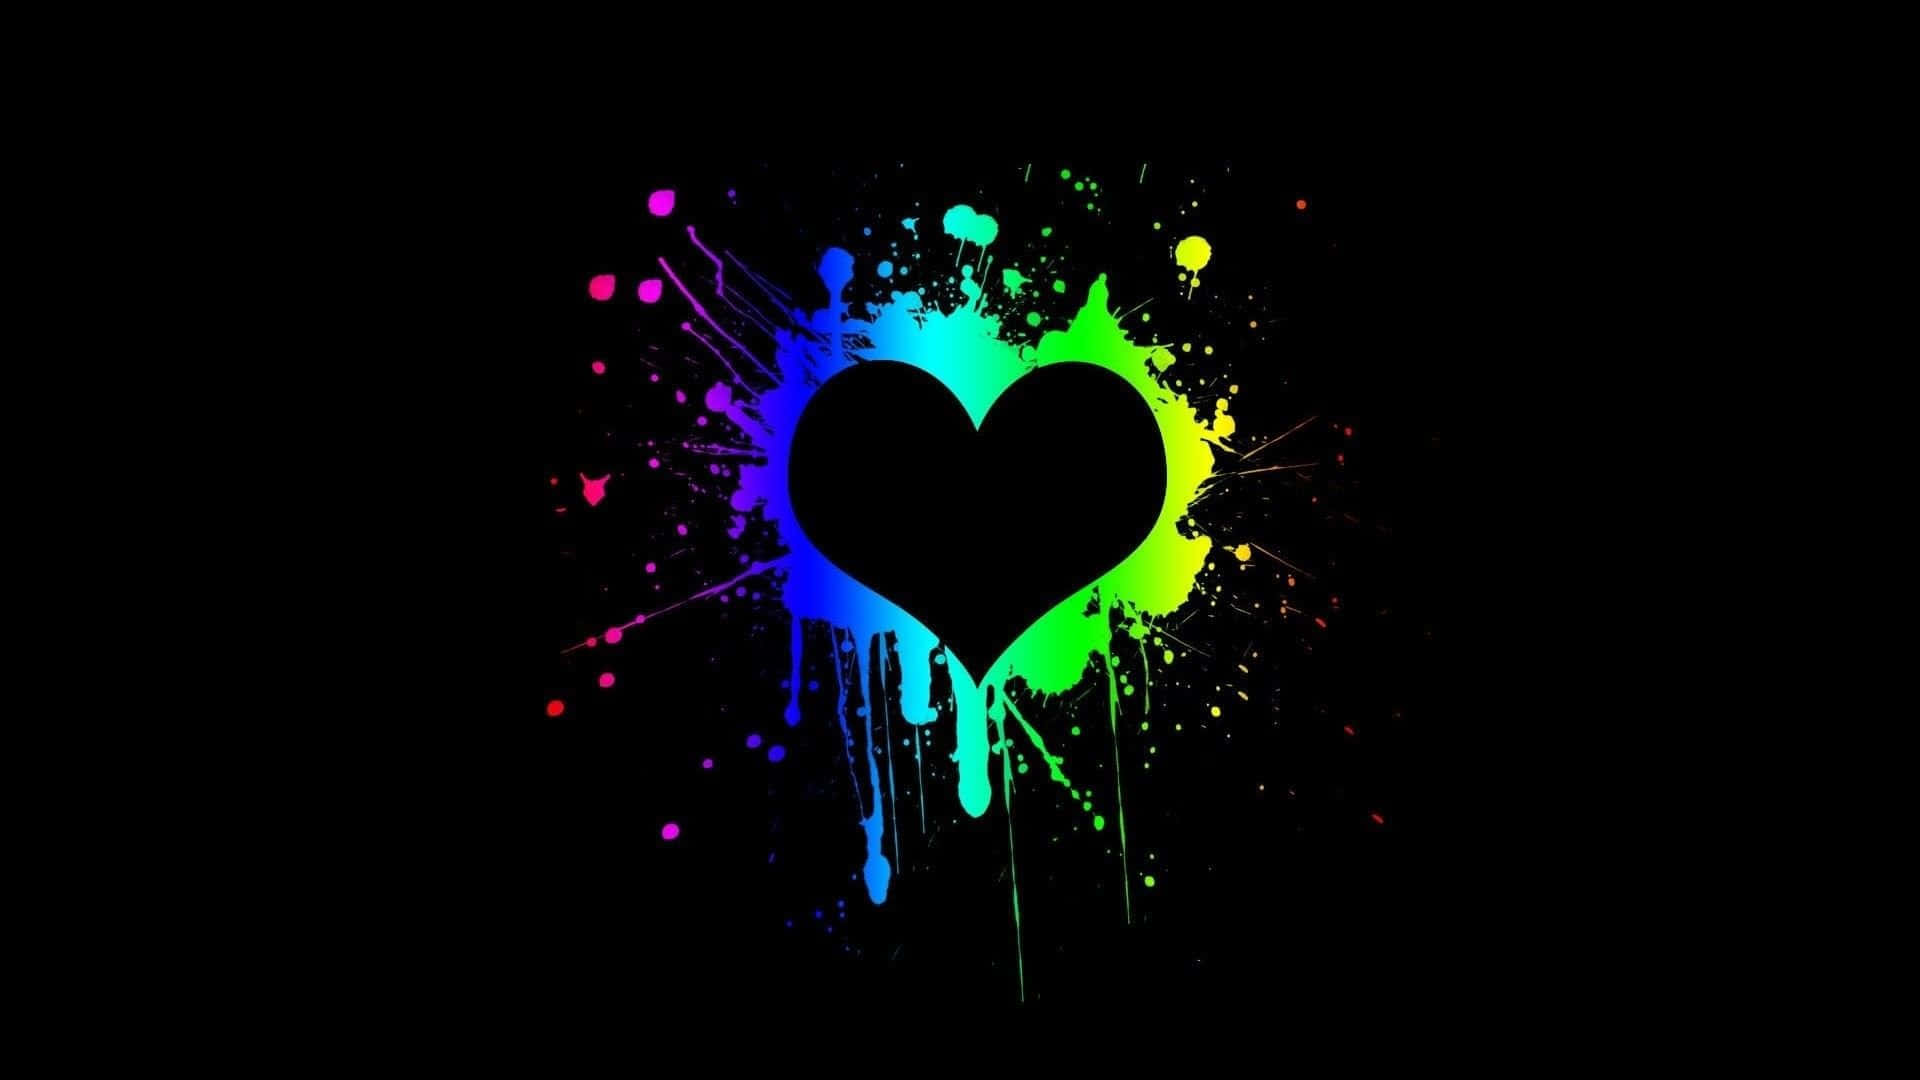 A Heart With Paint Splatters On A Black Background